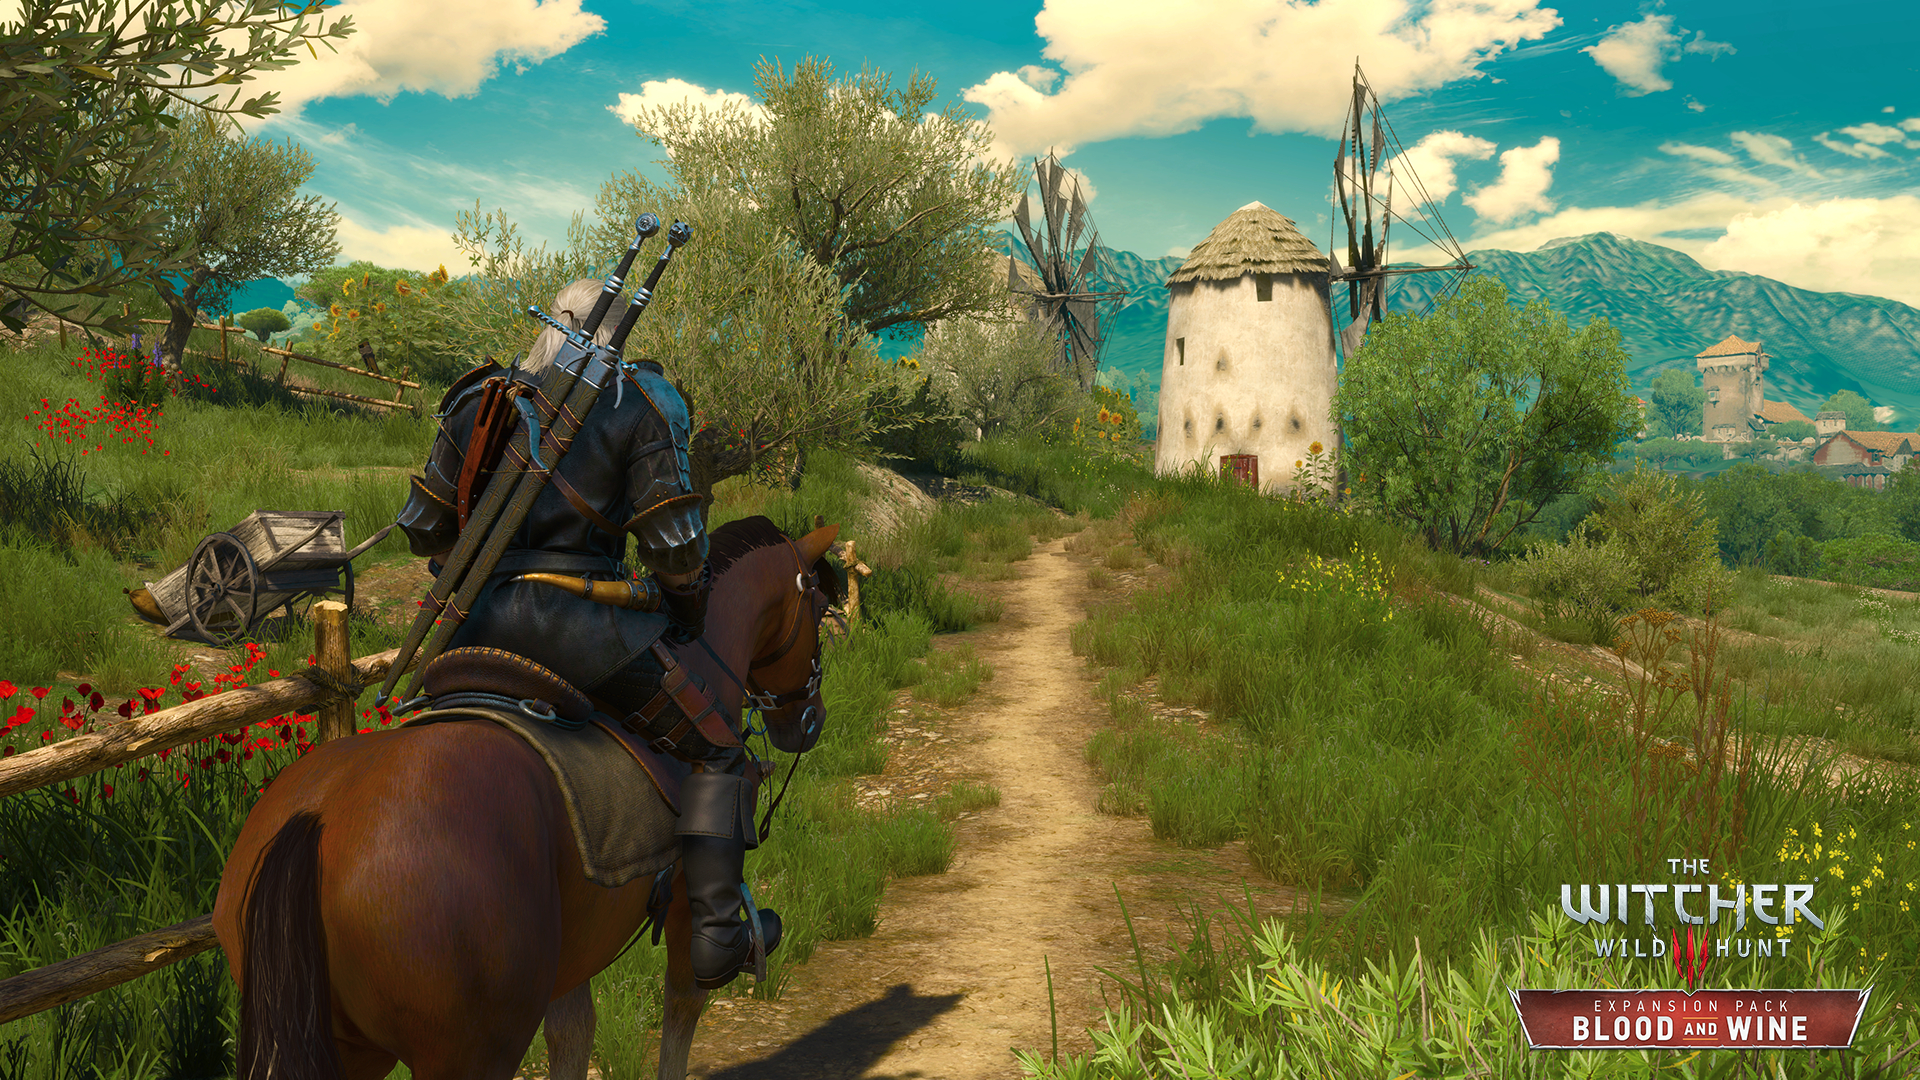 The witcher 3 blood and wine soundtrack blood and wine фото 89